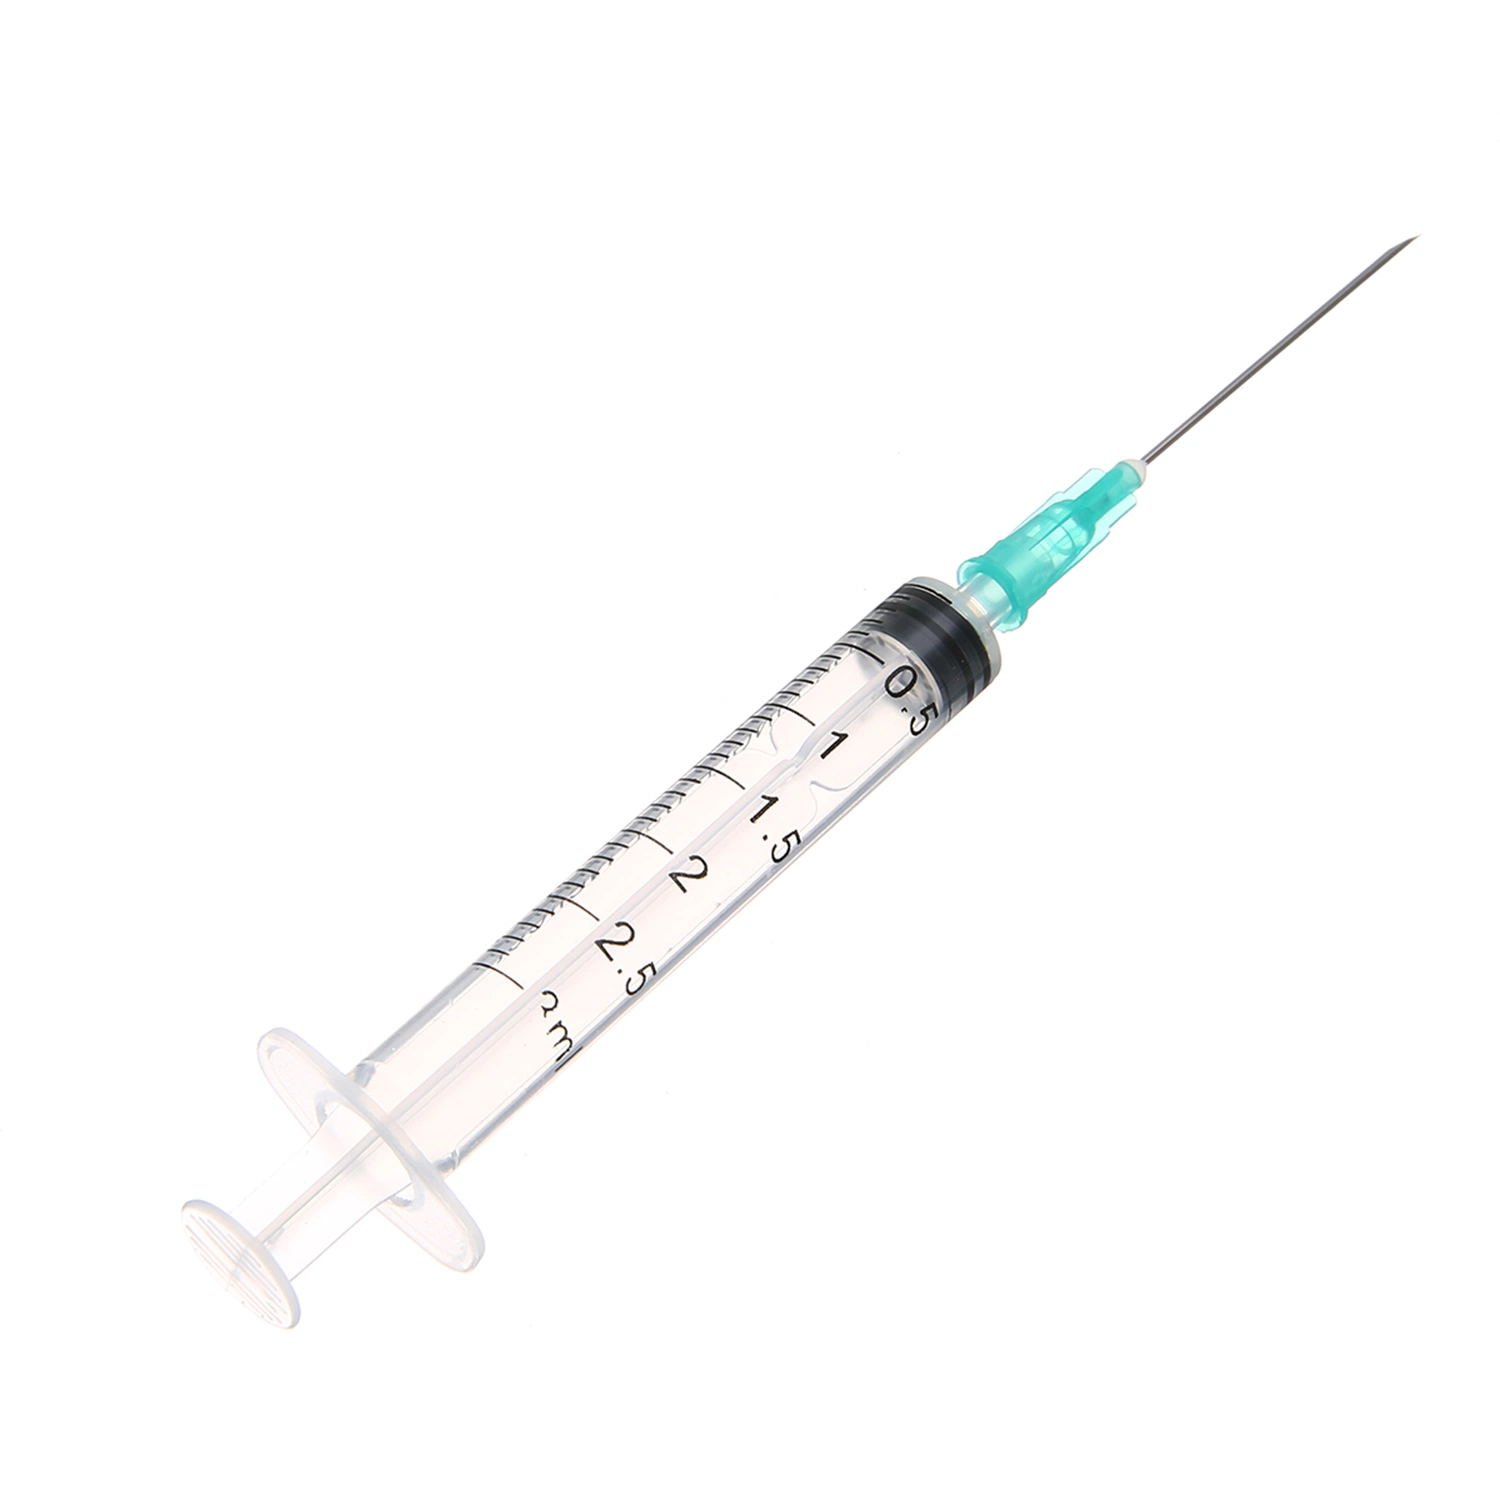 3 Parts 2.5ml Disposable Syringes with Needle Medical Syringes